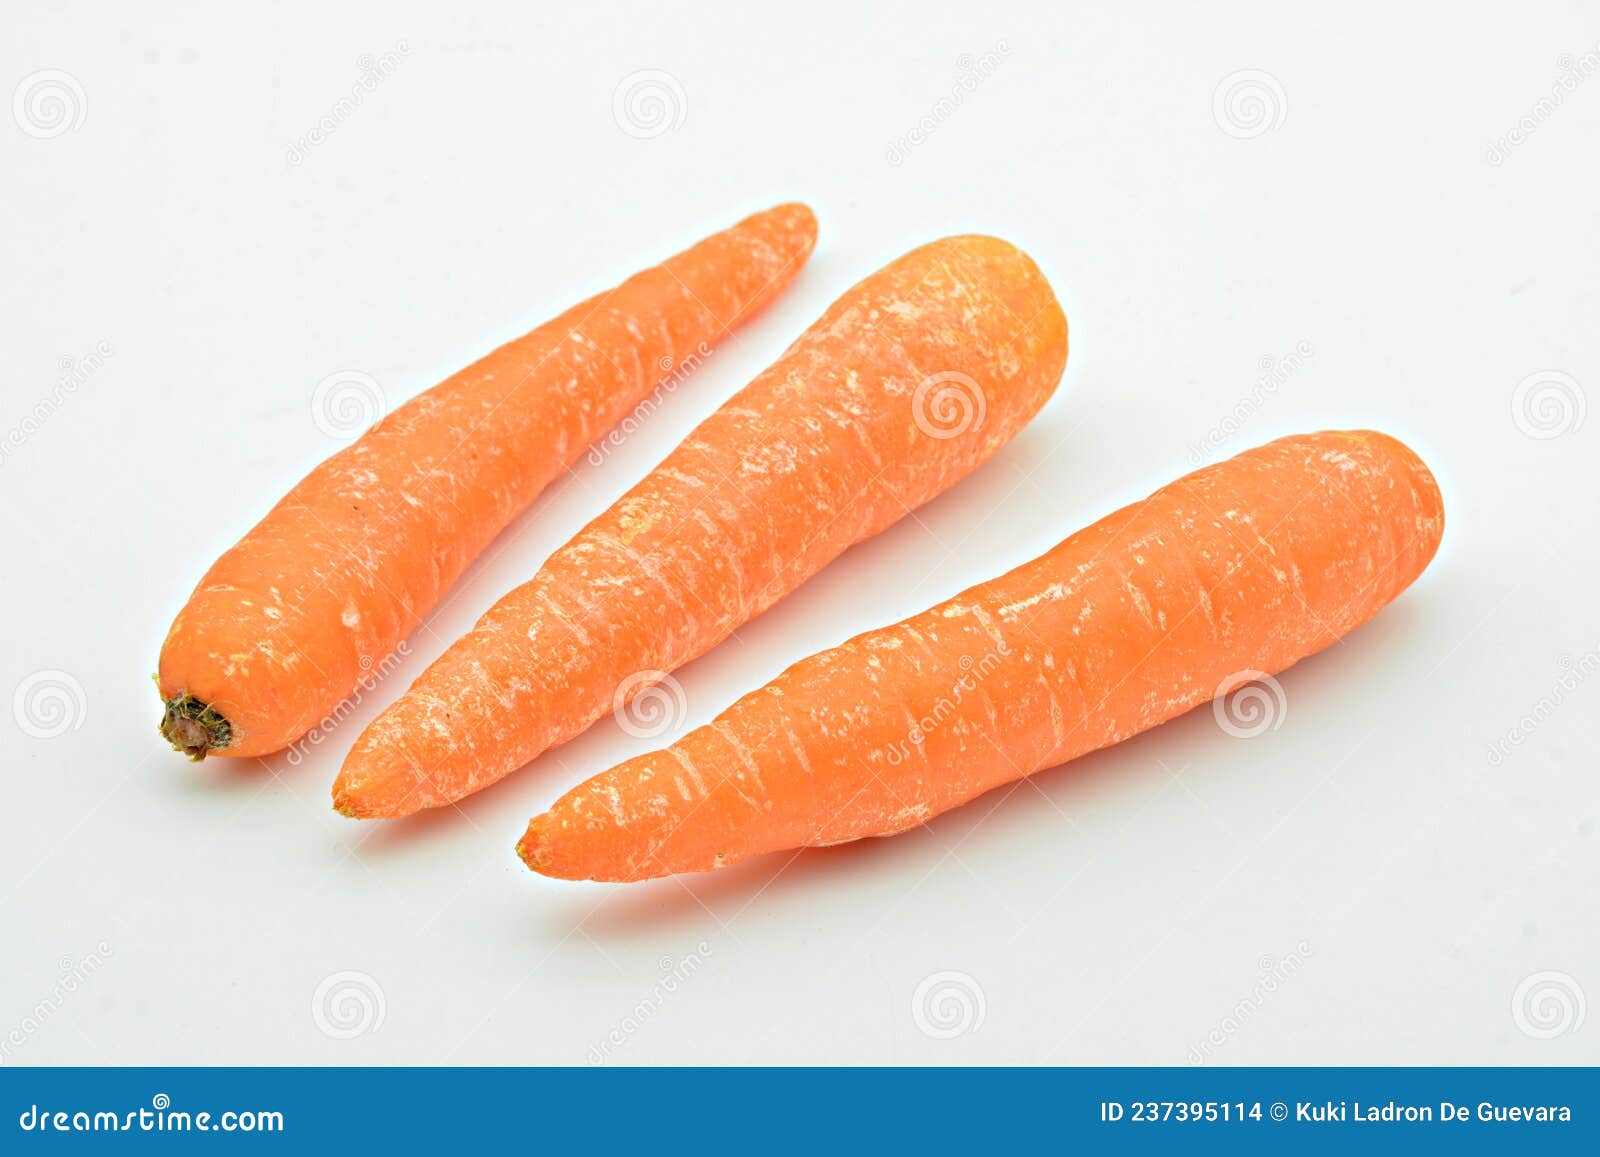 group of fresh carrots